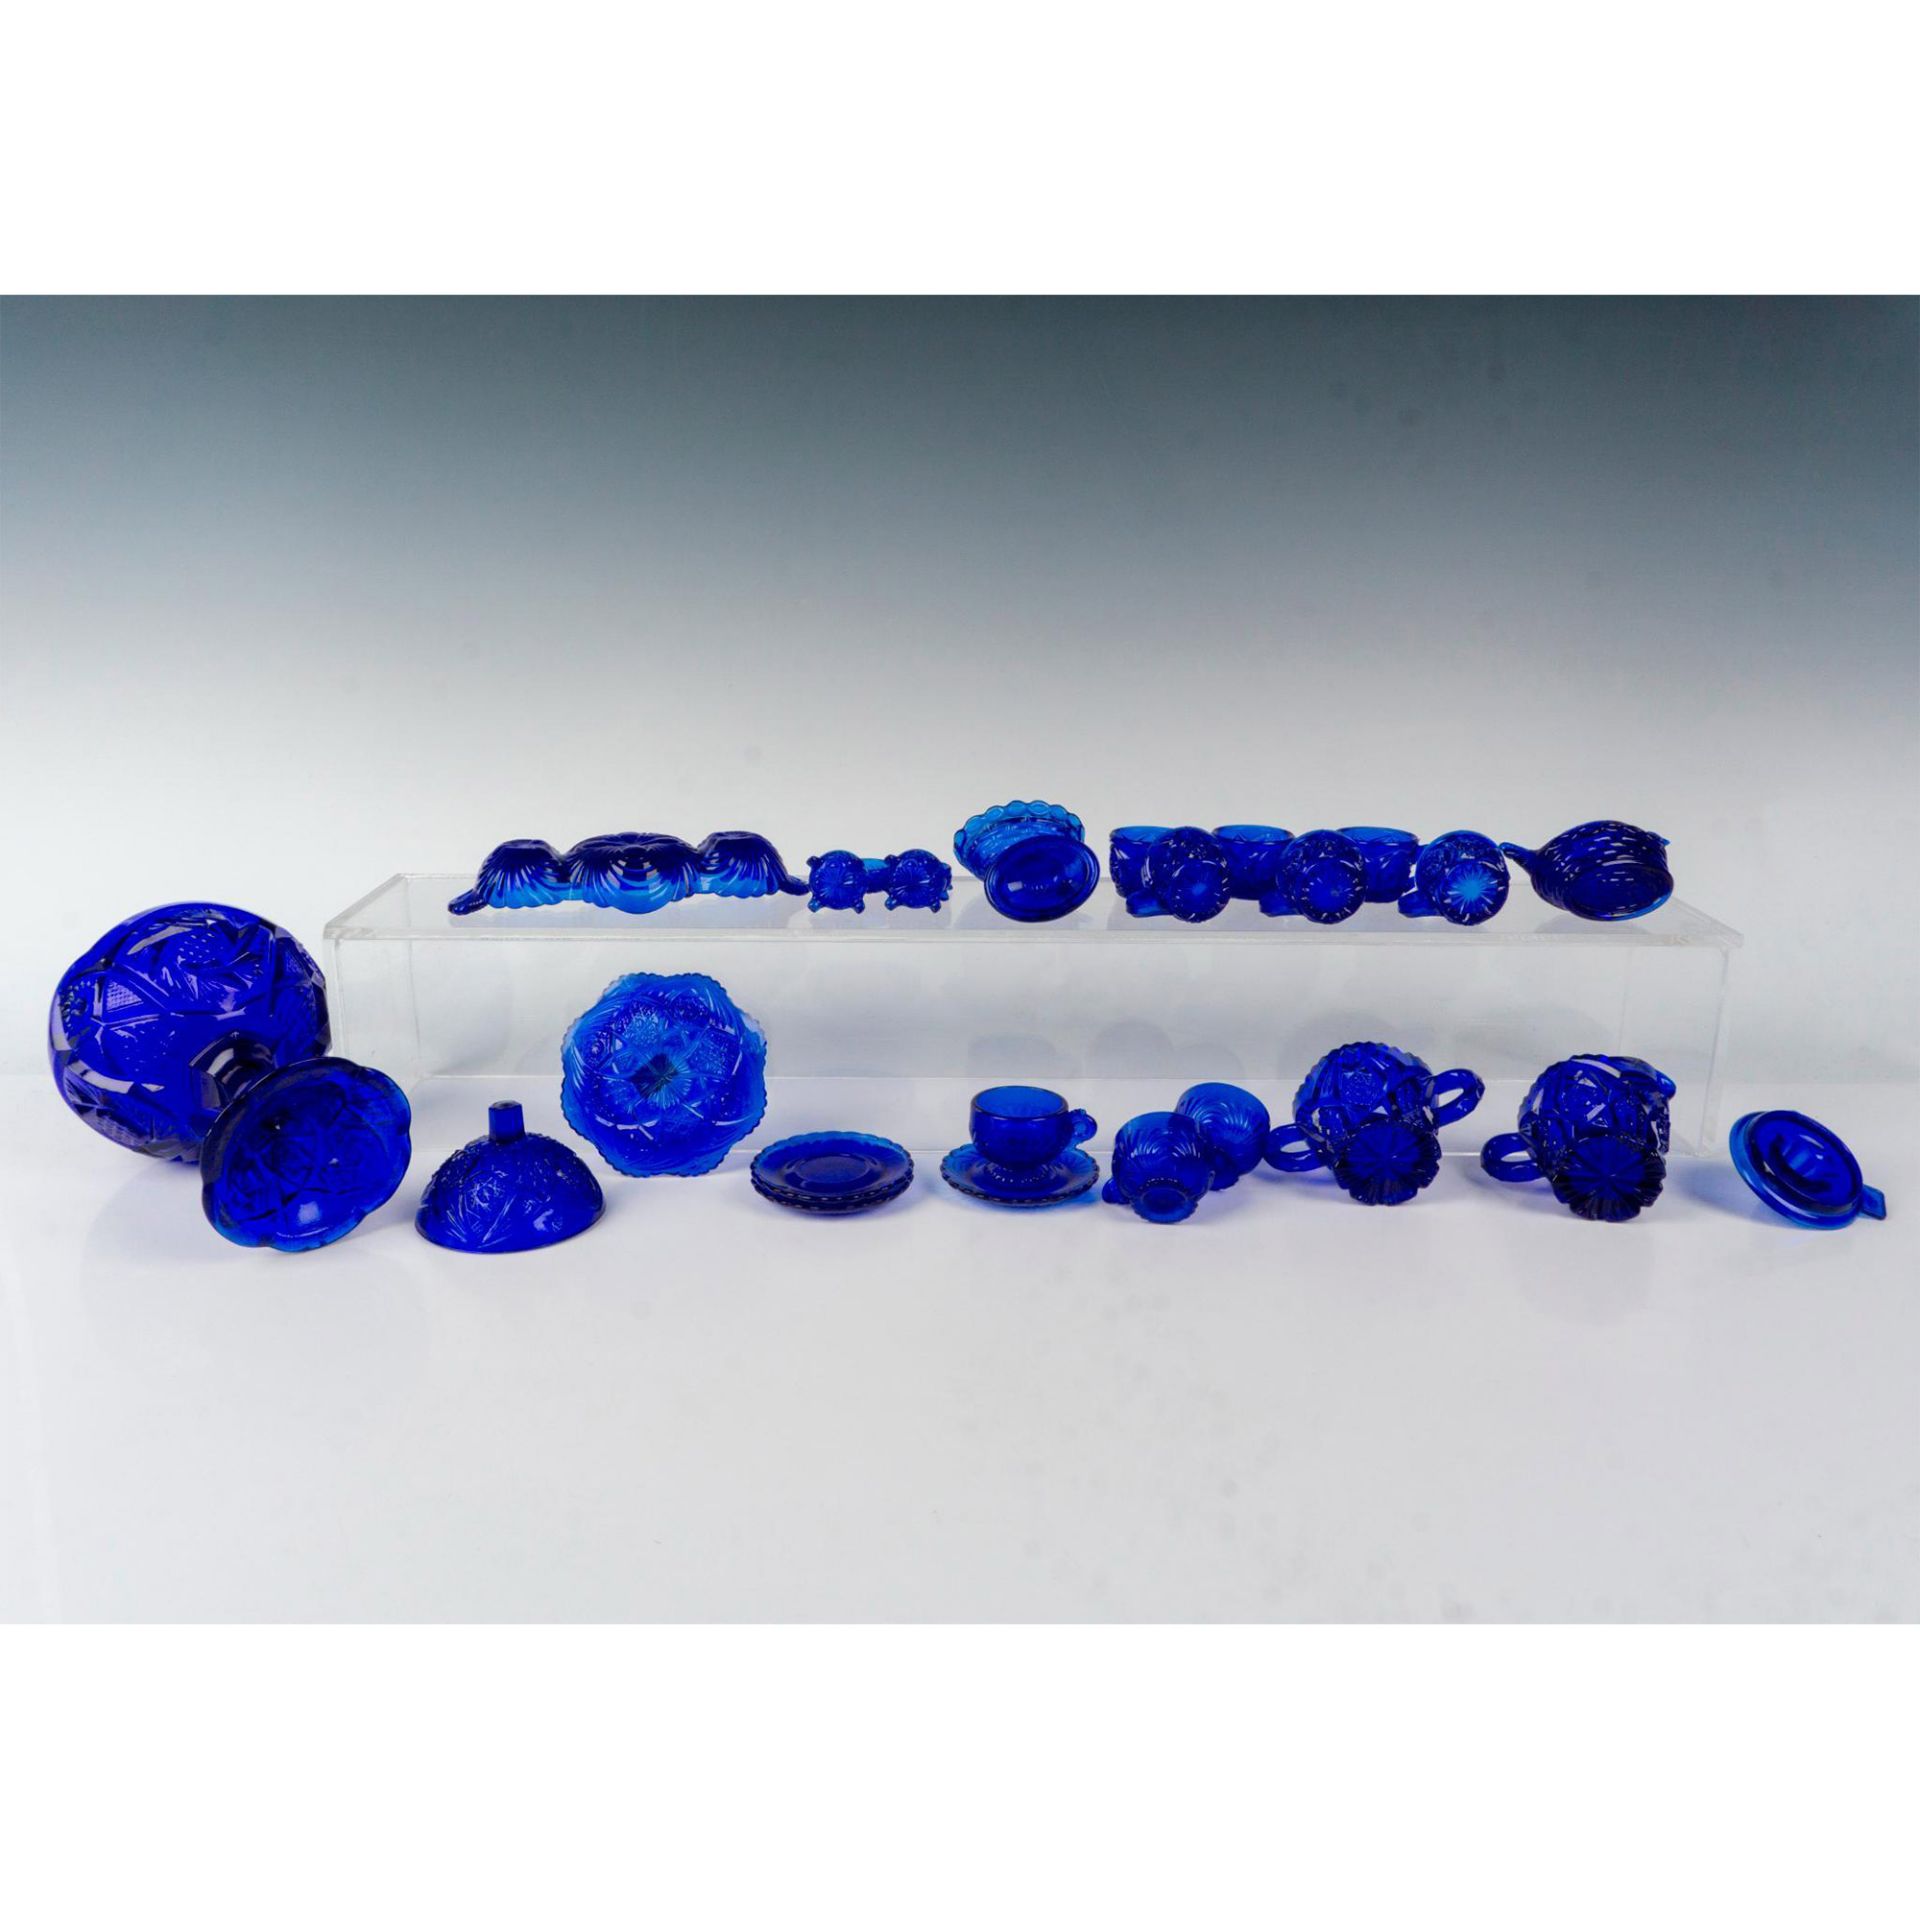 24pc Cobalt Blue Child's Glassware Grouping - Image 3 of 3